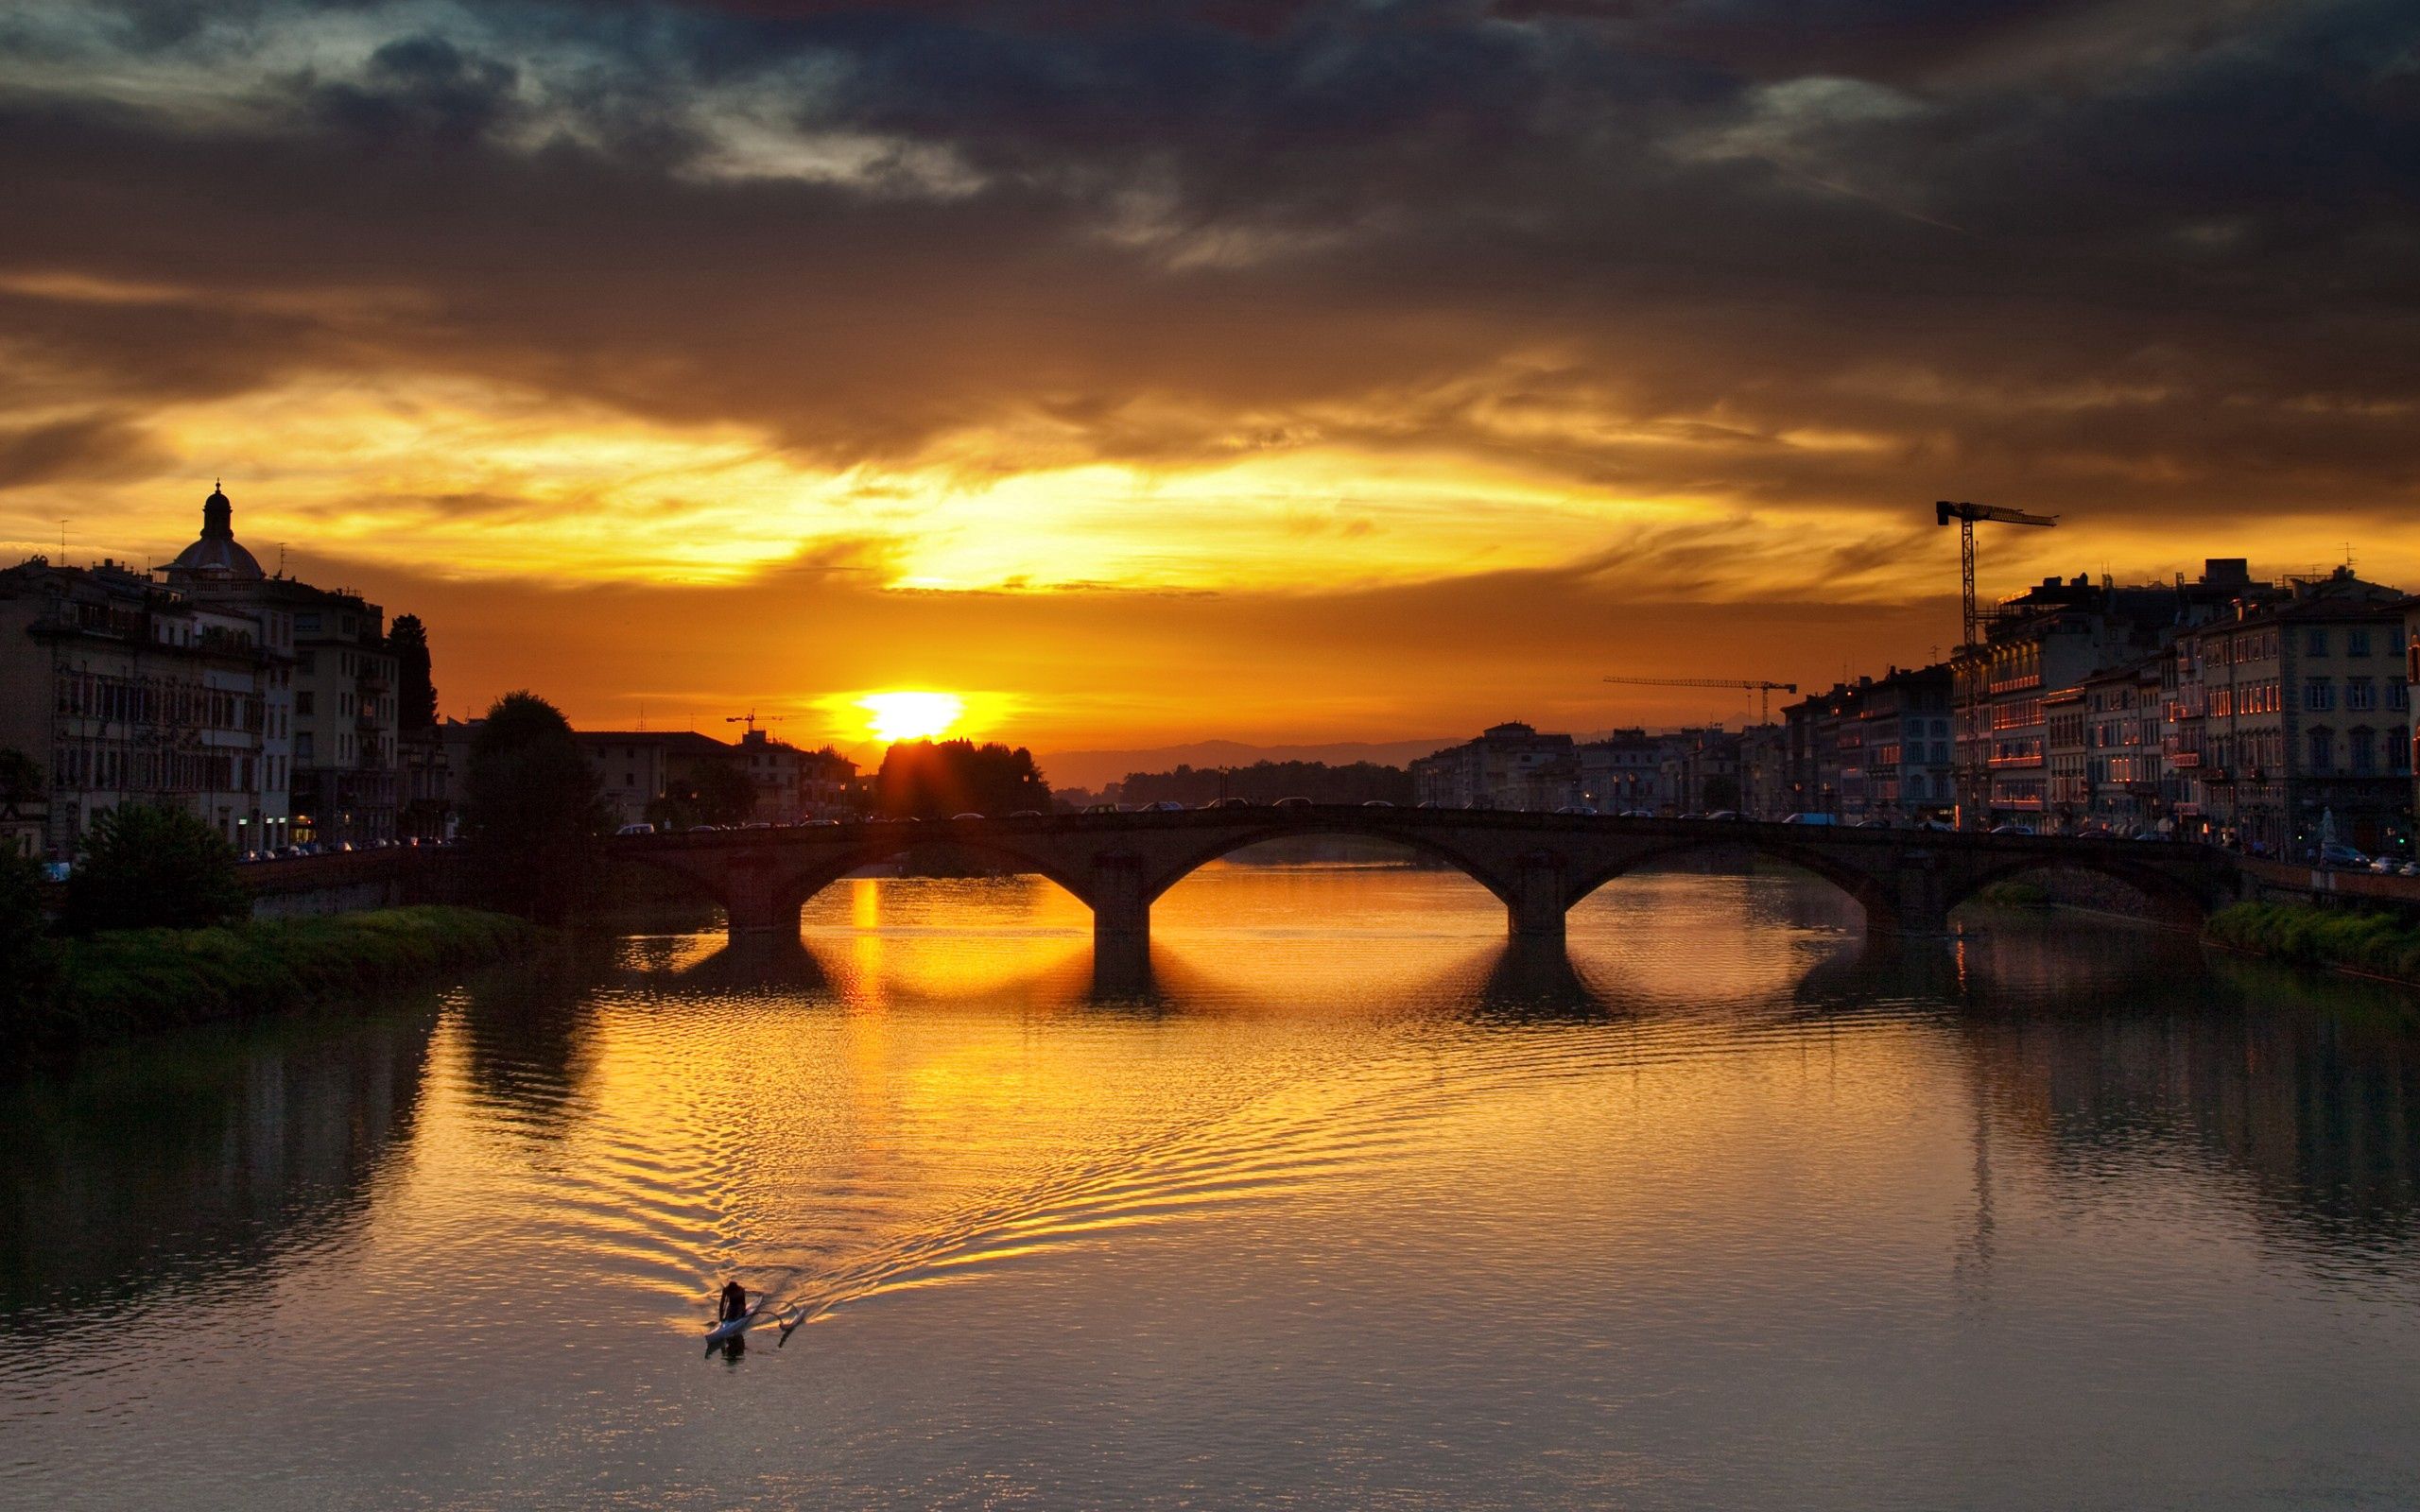 cities, rivers, sunset, architecture, old, bridge, ancient, florence